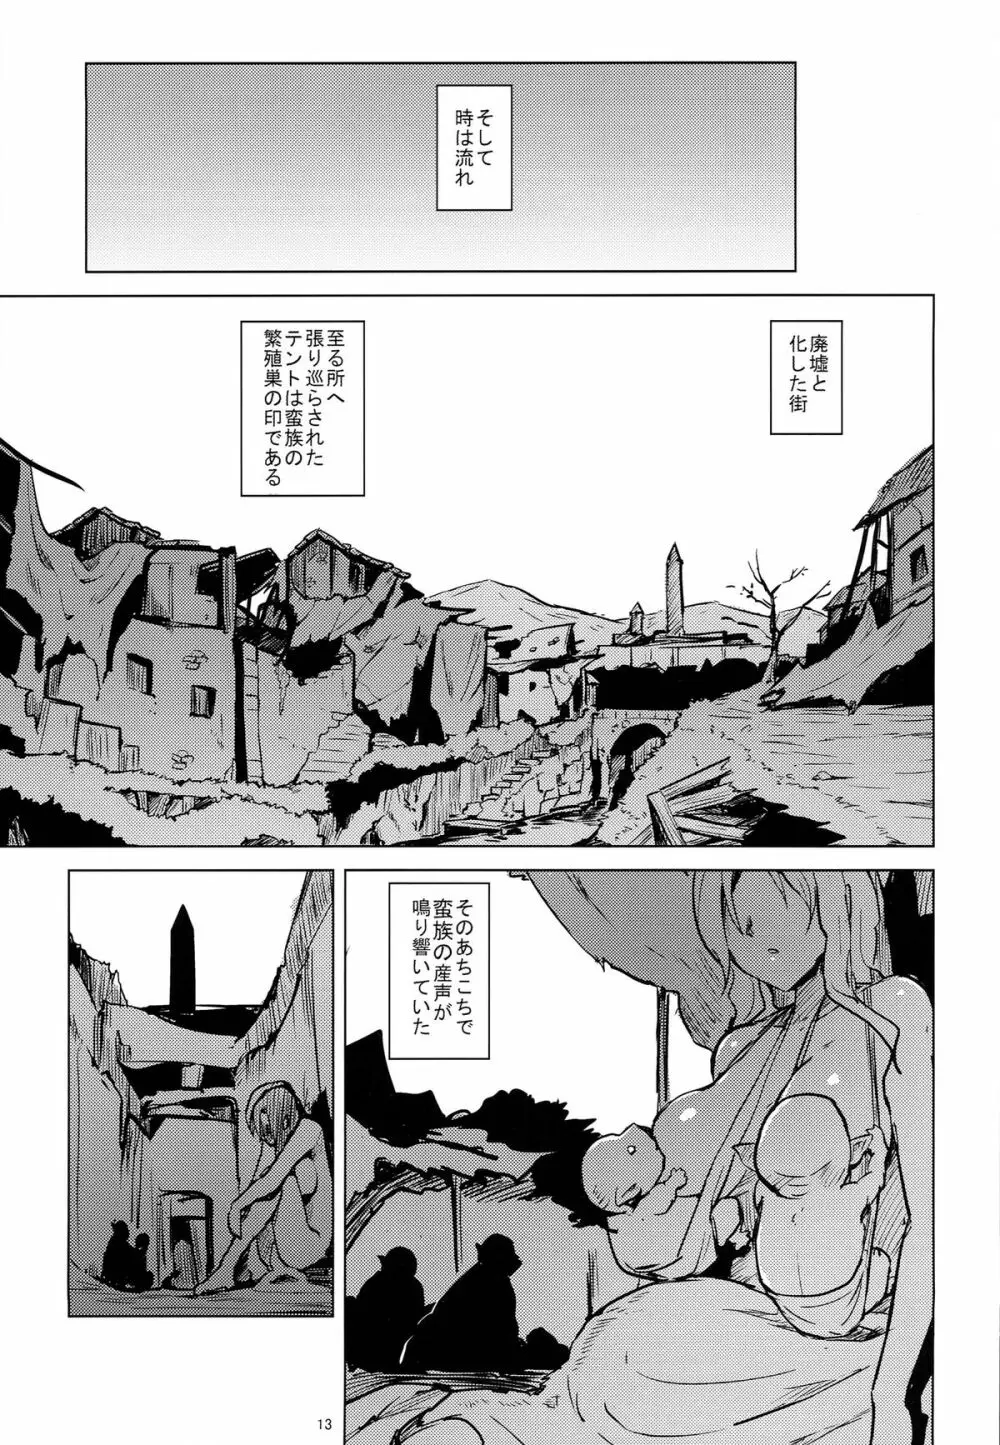 PRISON 蛮族の檻 Page.14